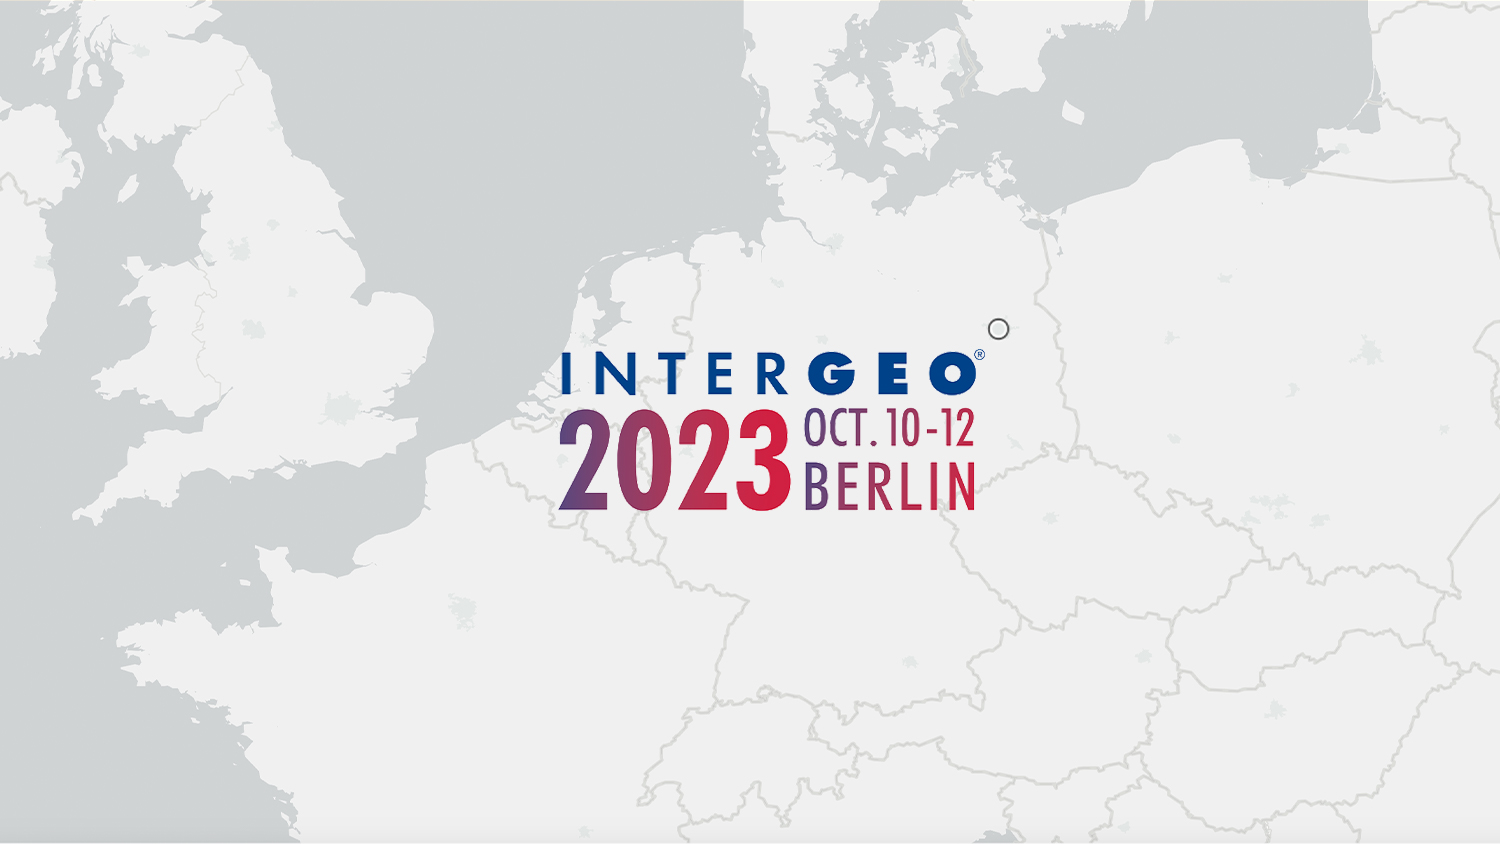 Intergeo 2023 Expo in Berlin, Germany with Eos Positioning Systems